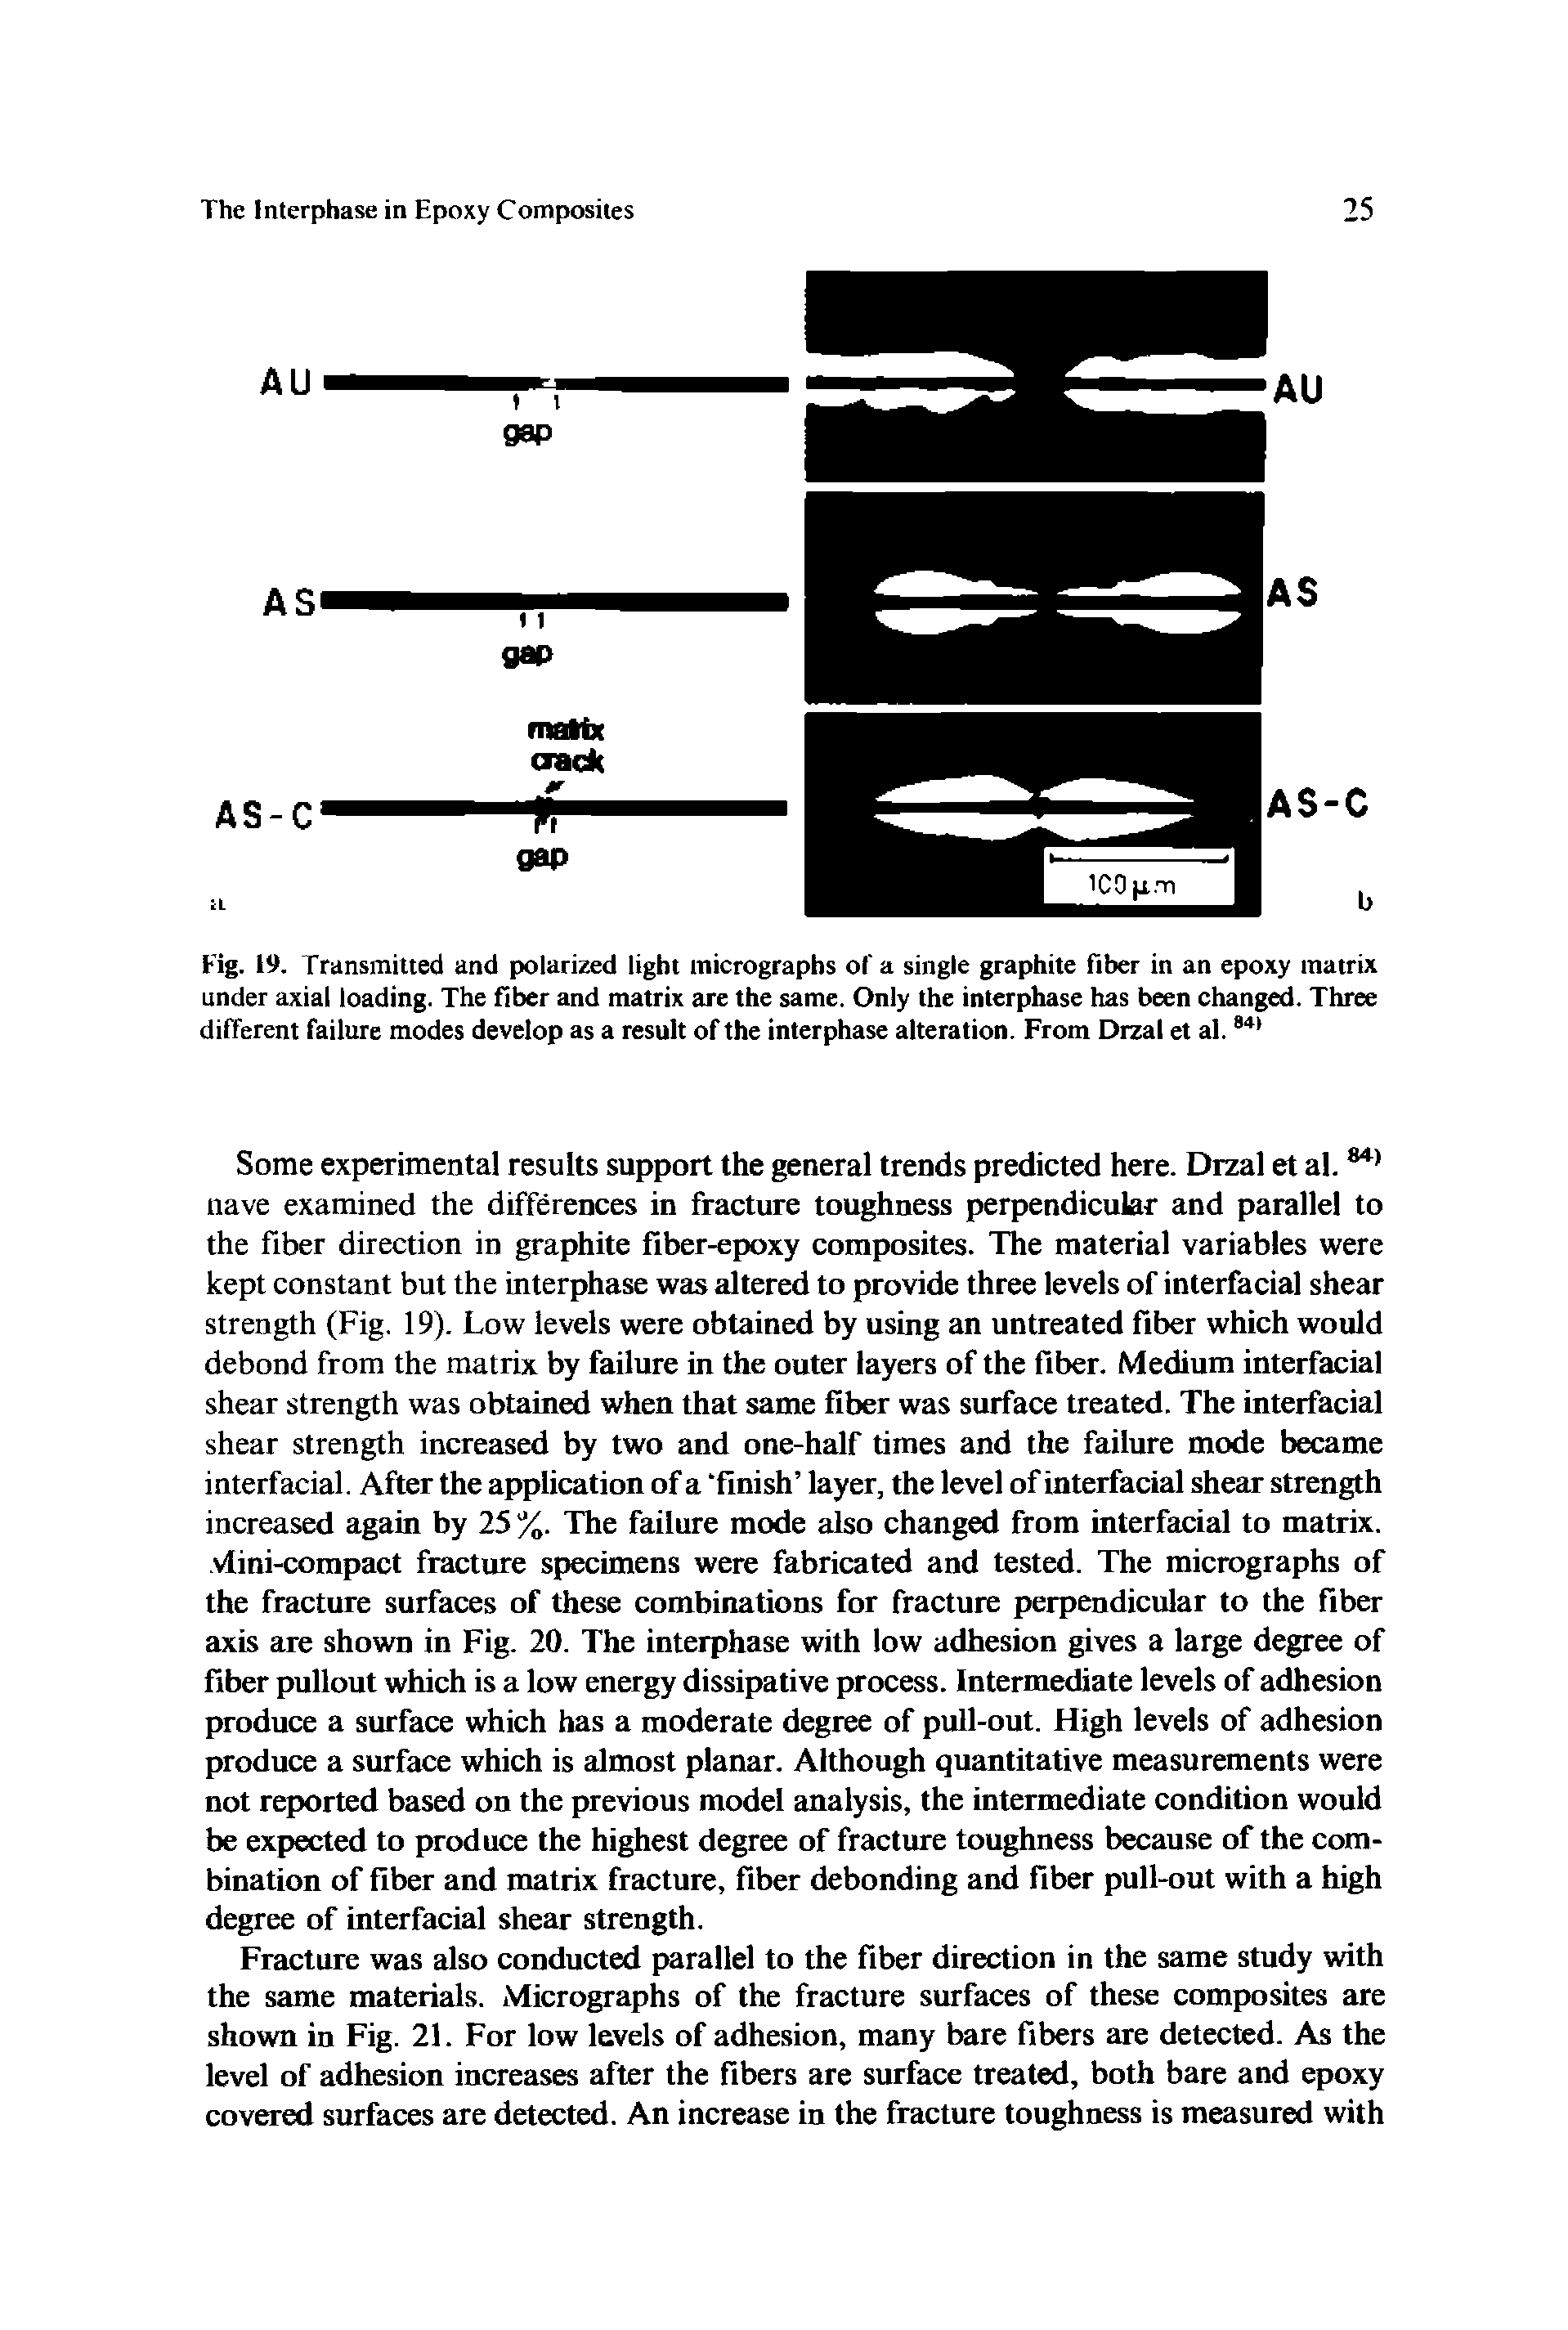 Fig. 19. Transmitted and polarized light micrographs of a single graphite fiber in an epoxy matrix under axial loading. The fiber and matrix are the same. Only the interphase has been changed. Three different failure modes develop as a result of the interphase alteration. From Drzal et al. 841...